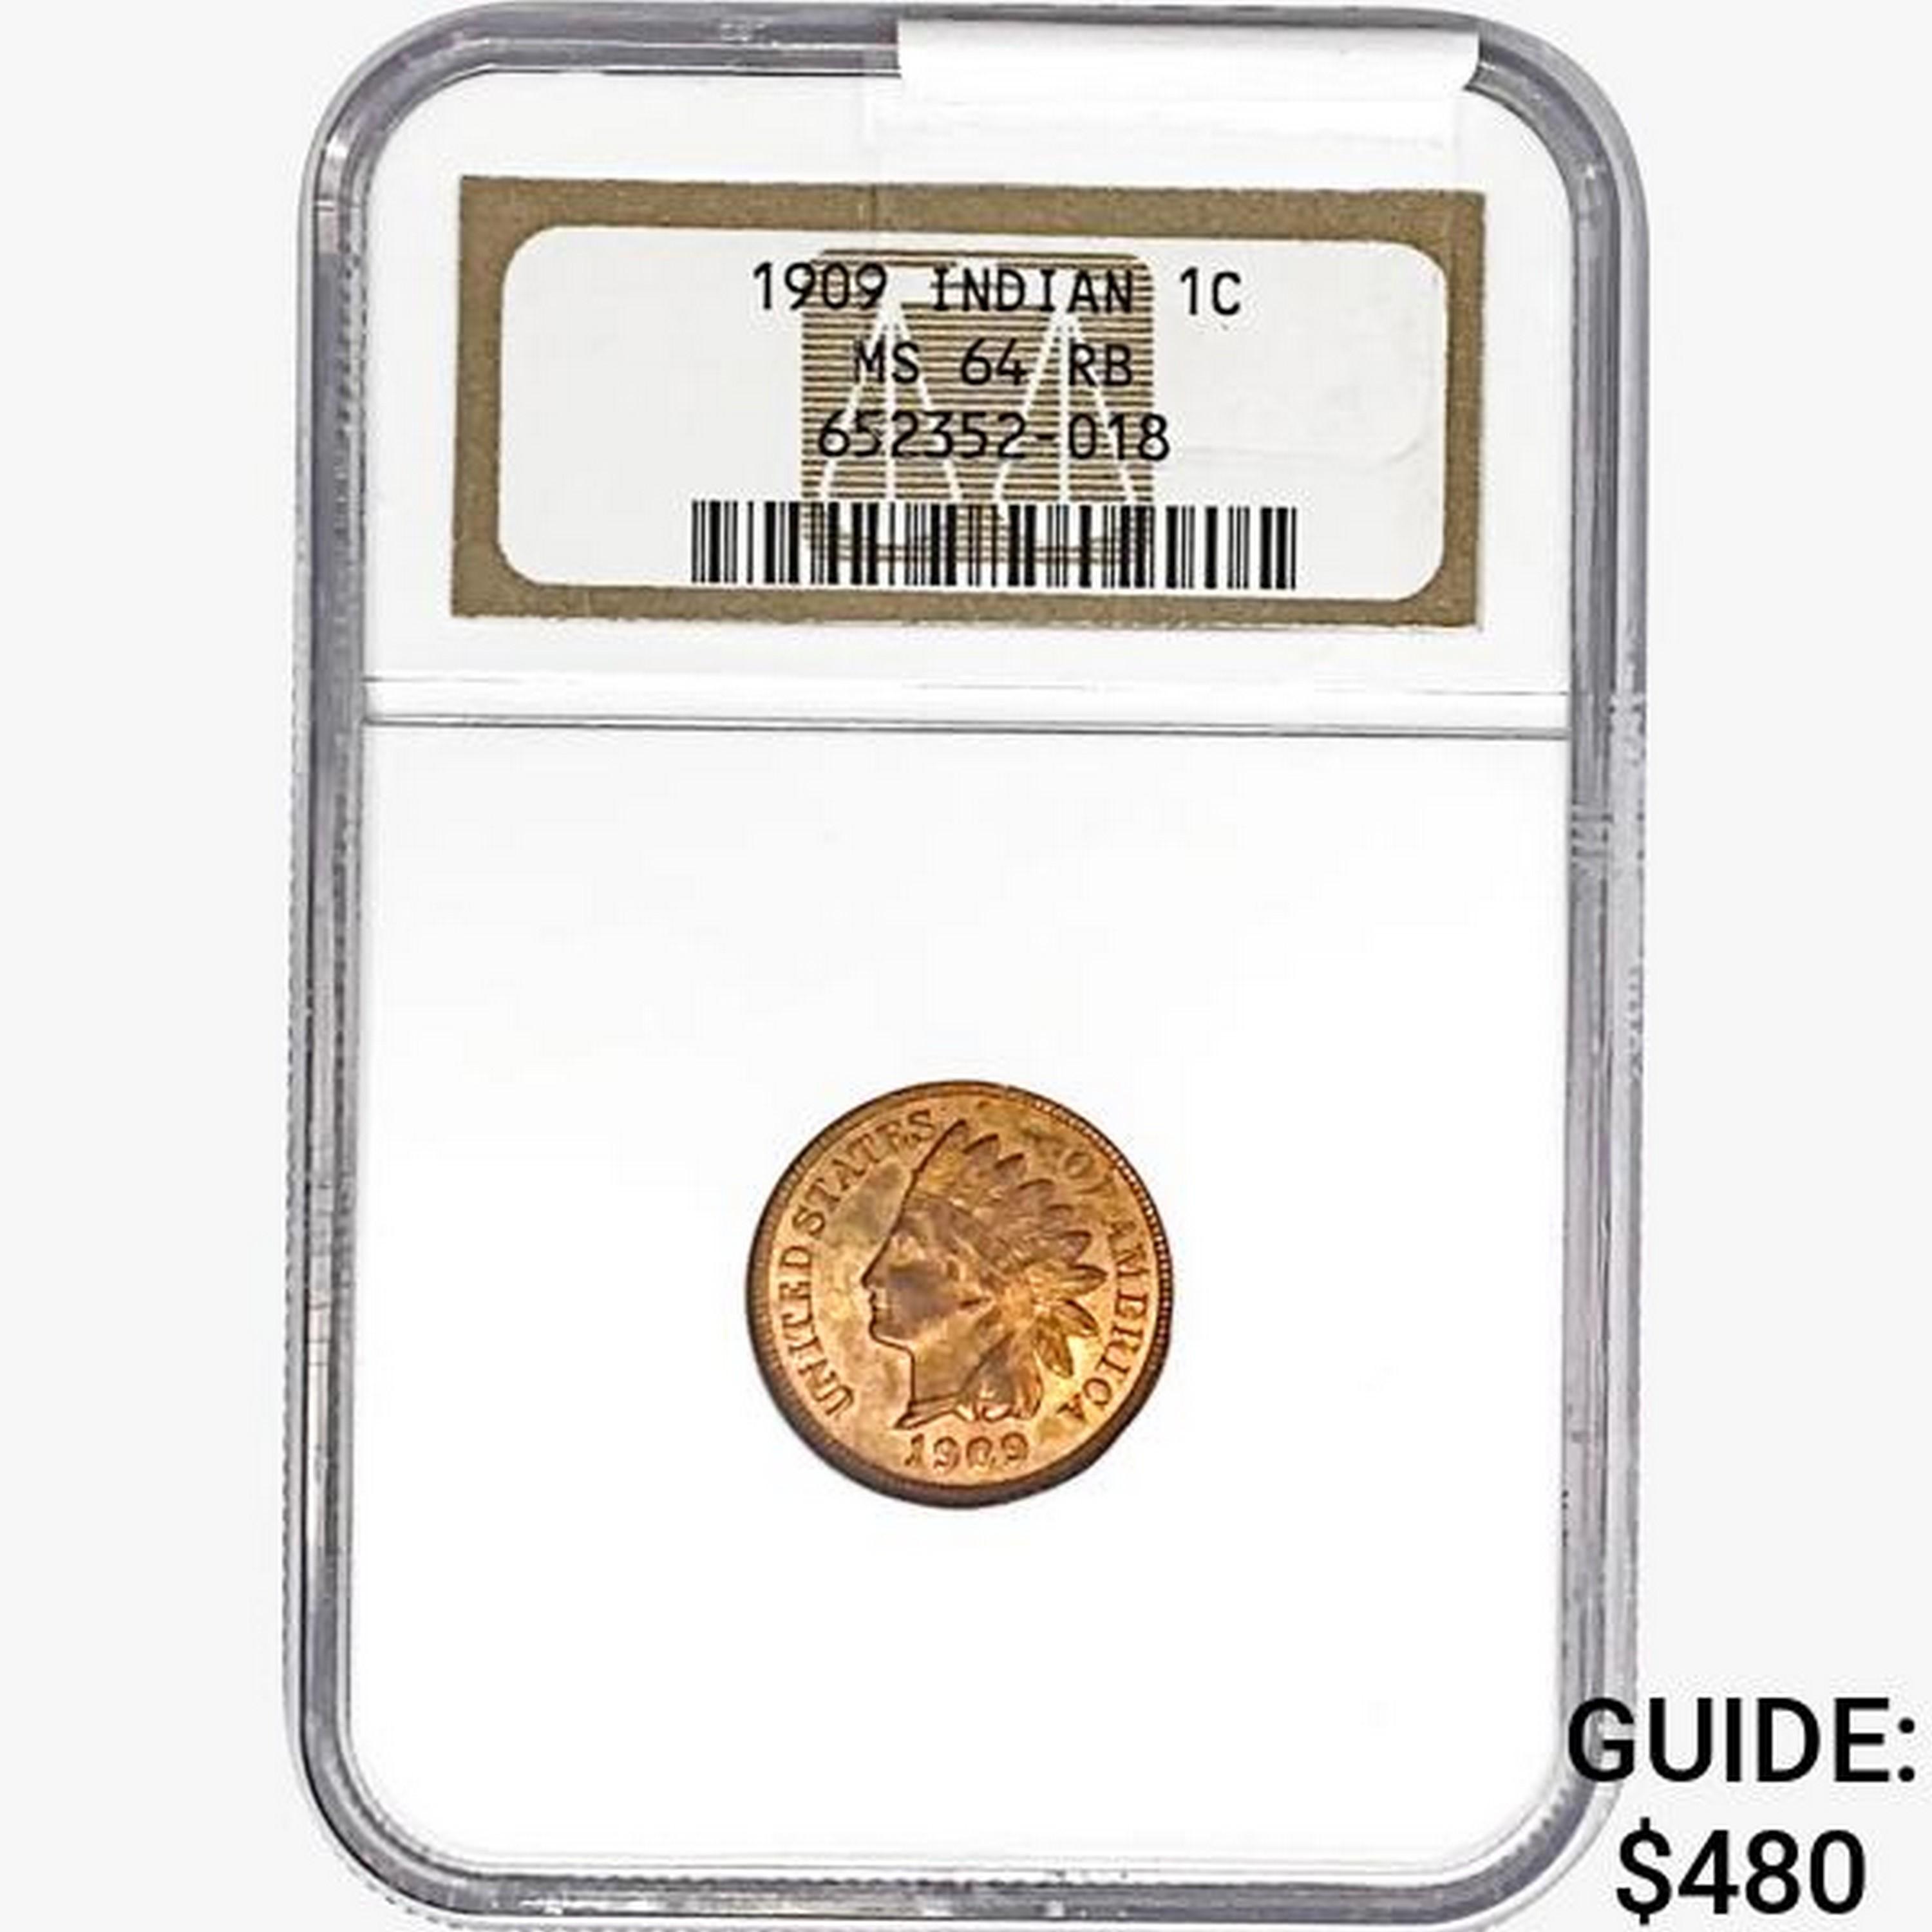 1909 Indian Head Cent NGC MS64 RB